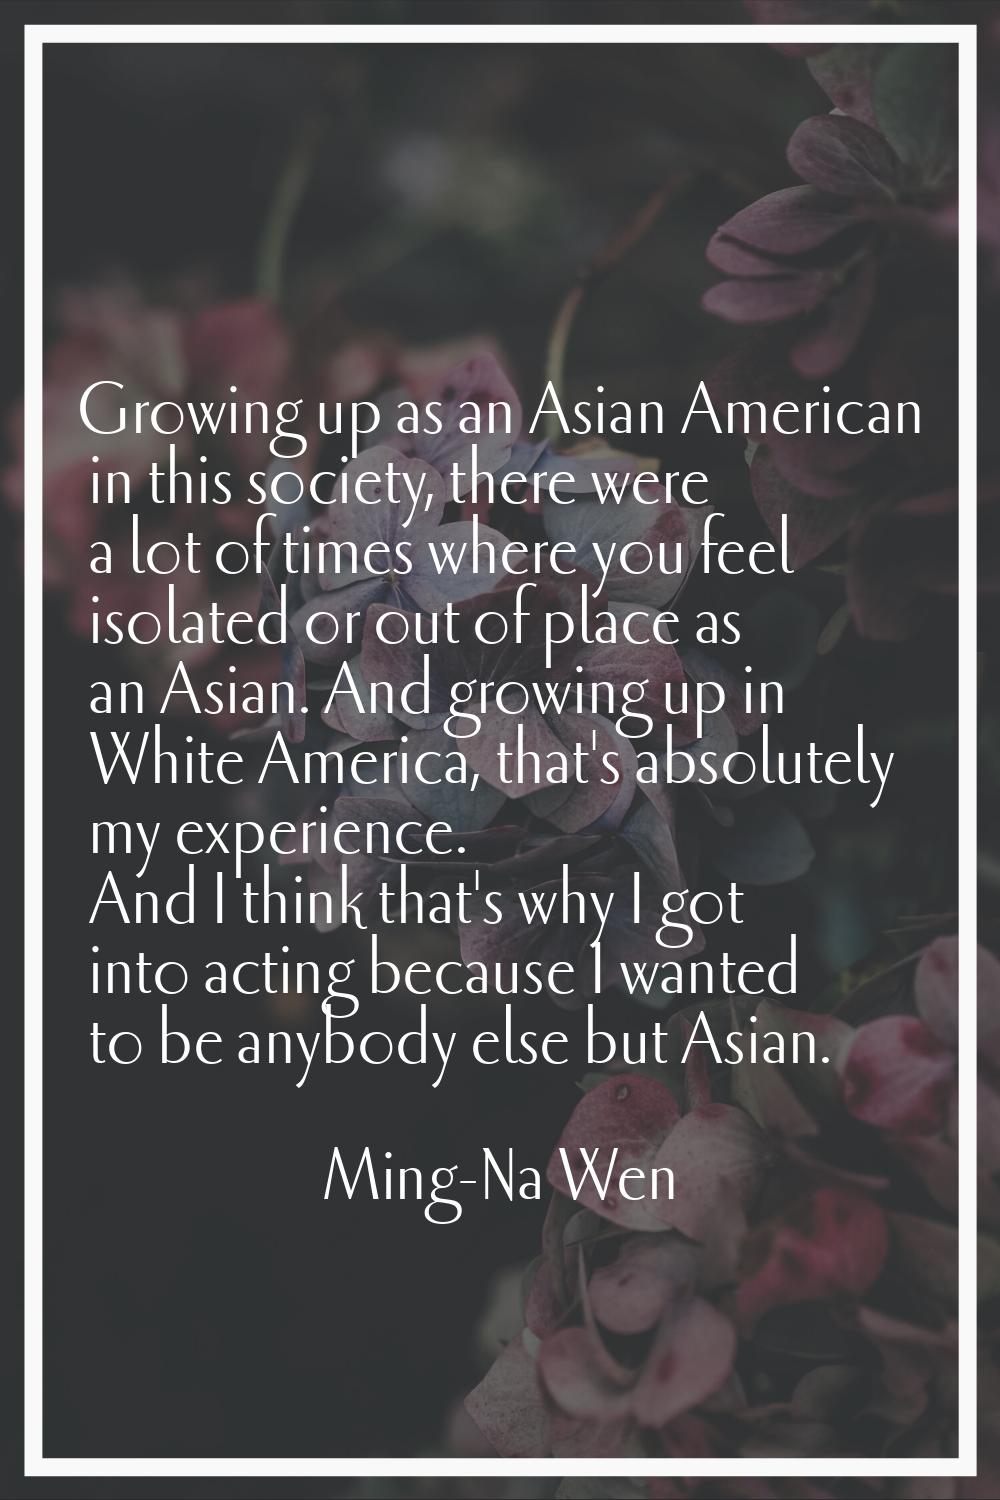 Growing up as an Asian American in this society, there were a lot of times where you feel isolated 